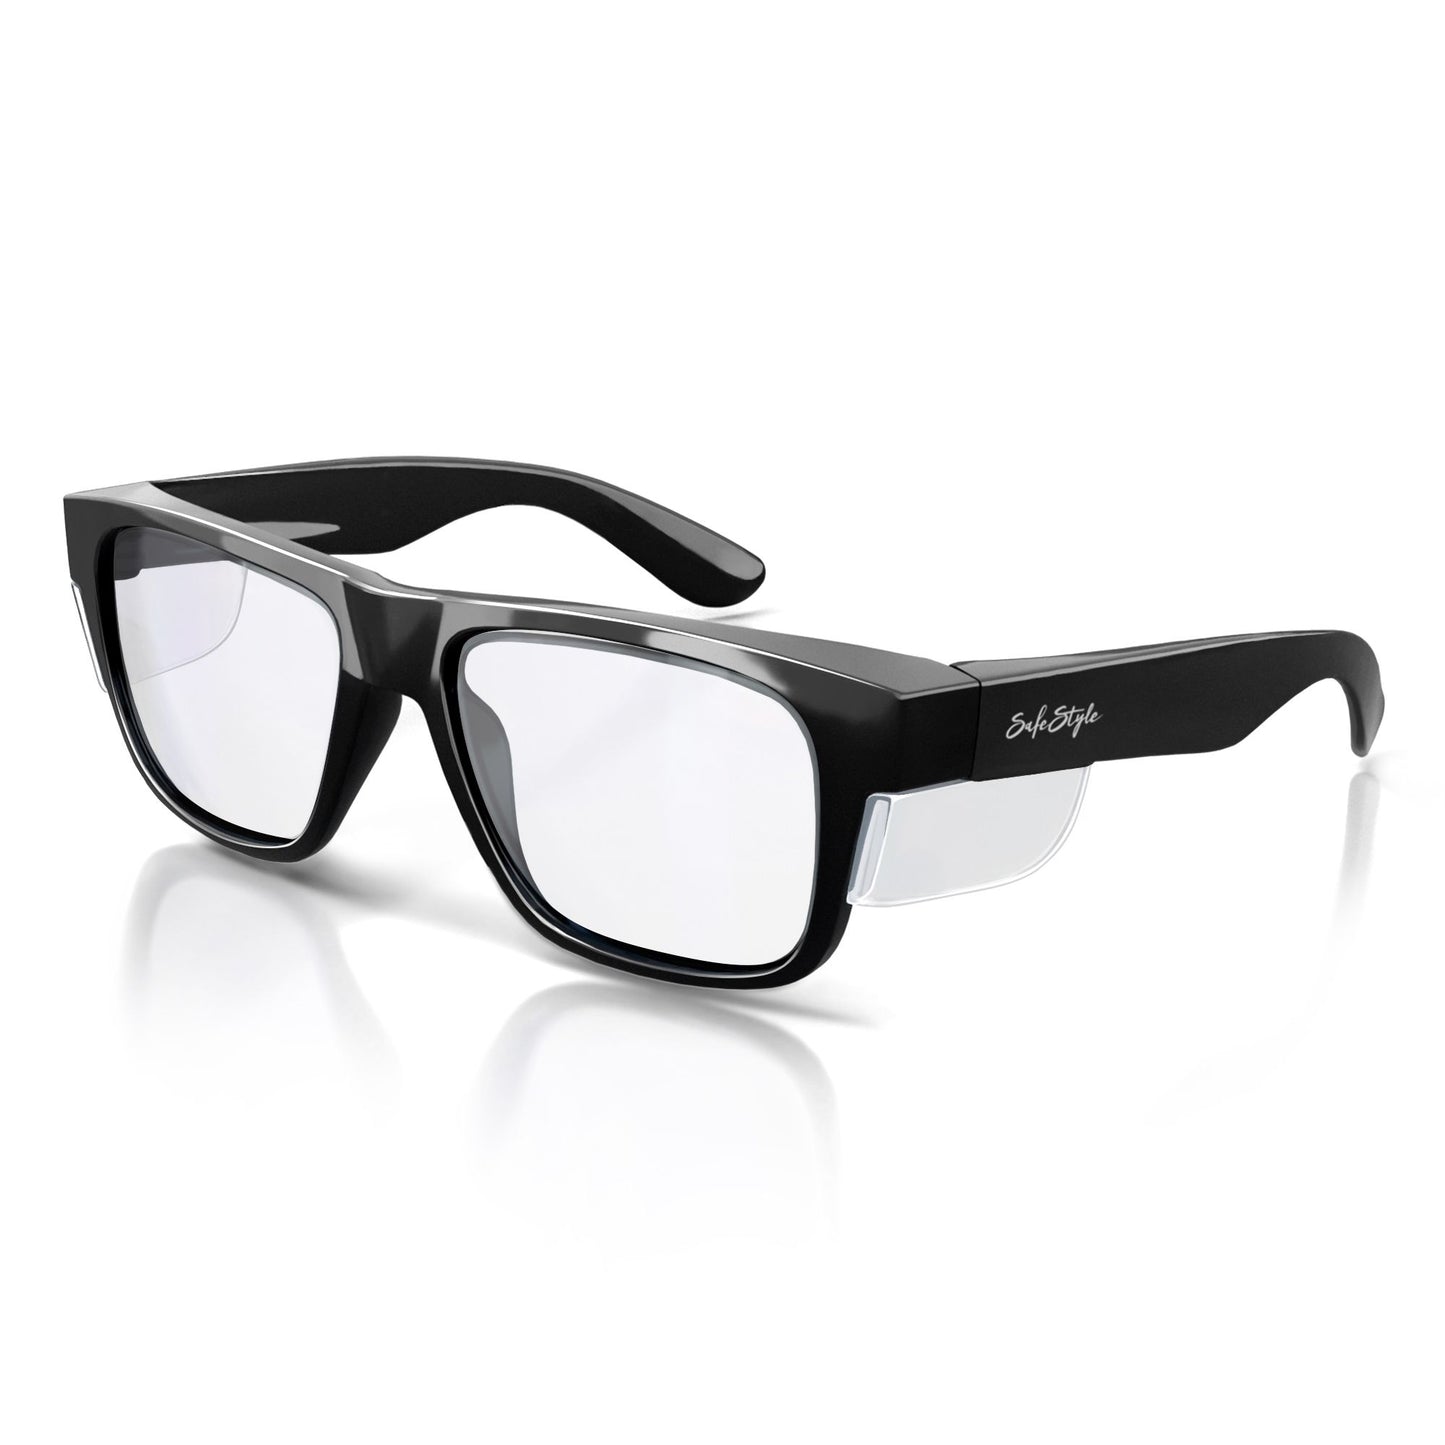 SafeStyle Fusions Black Frame/Clear Lens